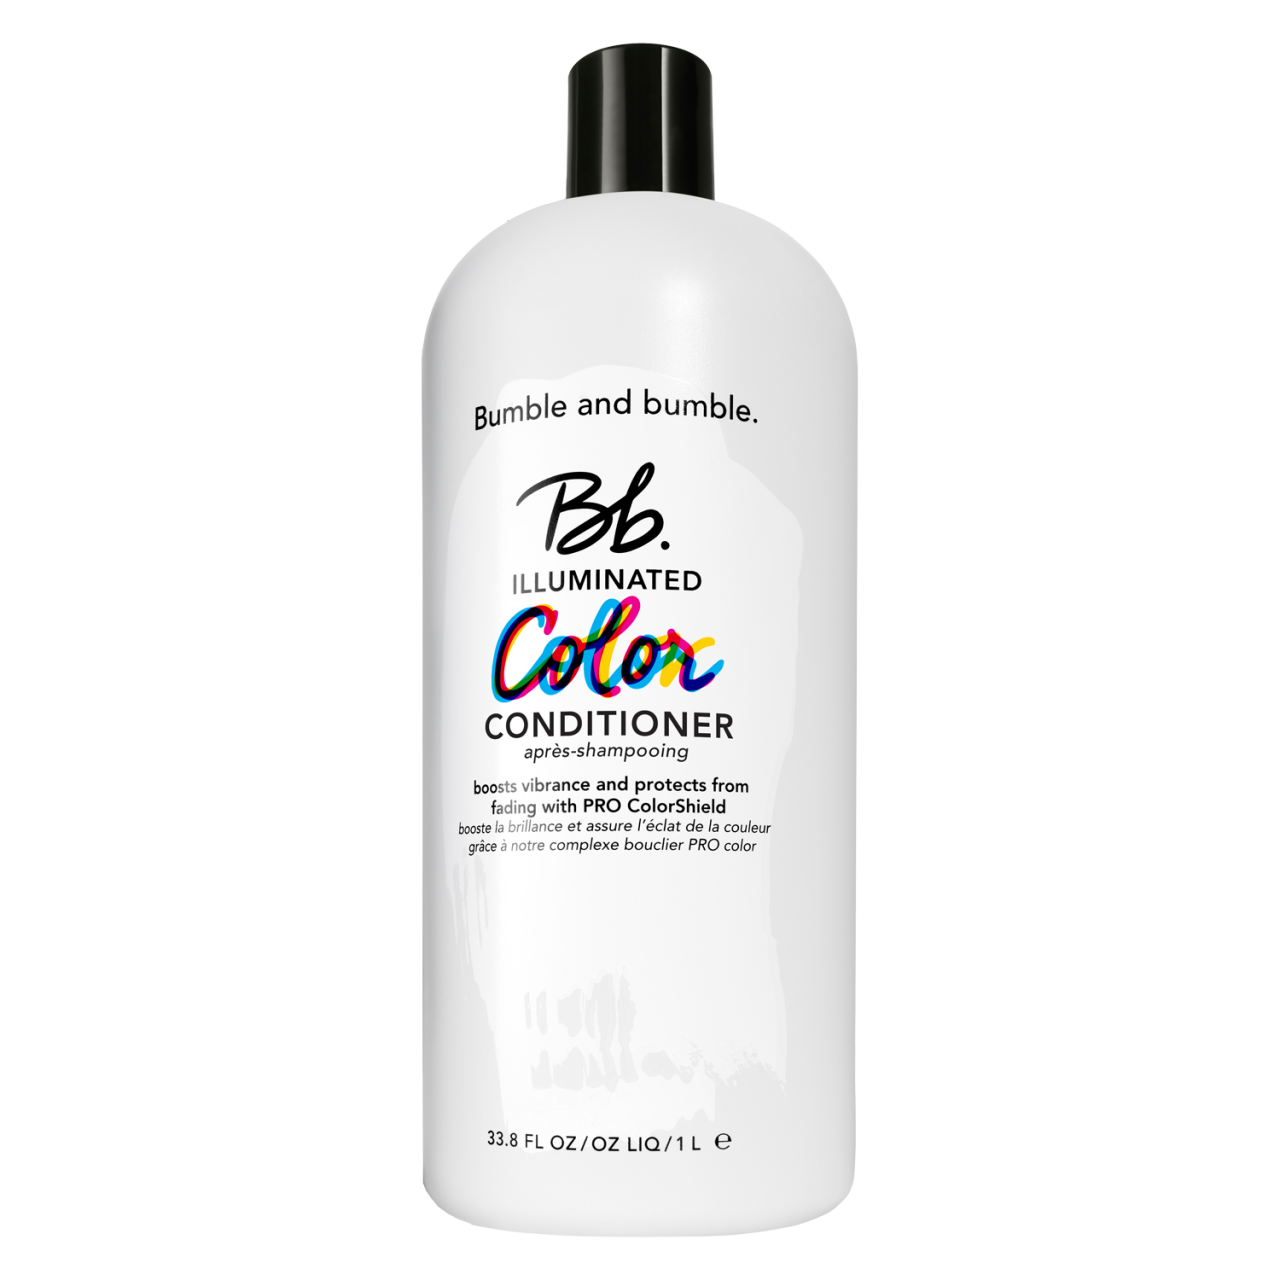 Bb. Color - Illuminated Color Conditioner von Bumble and bumble.